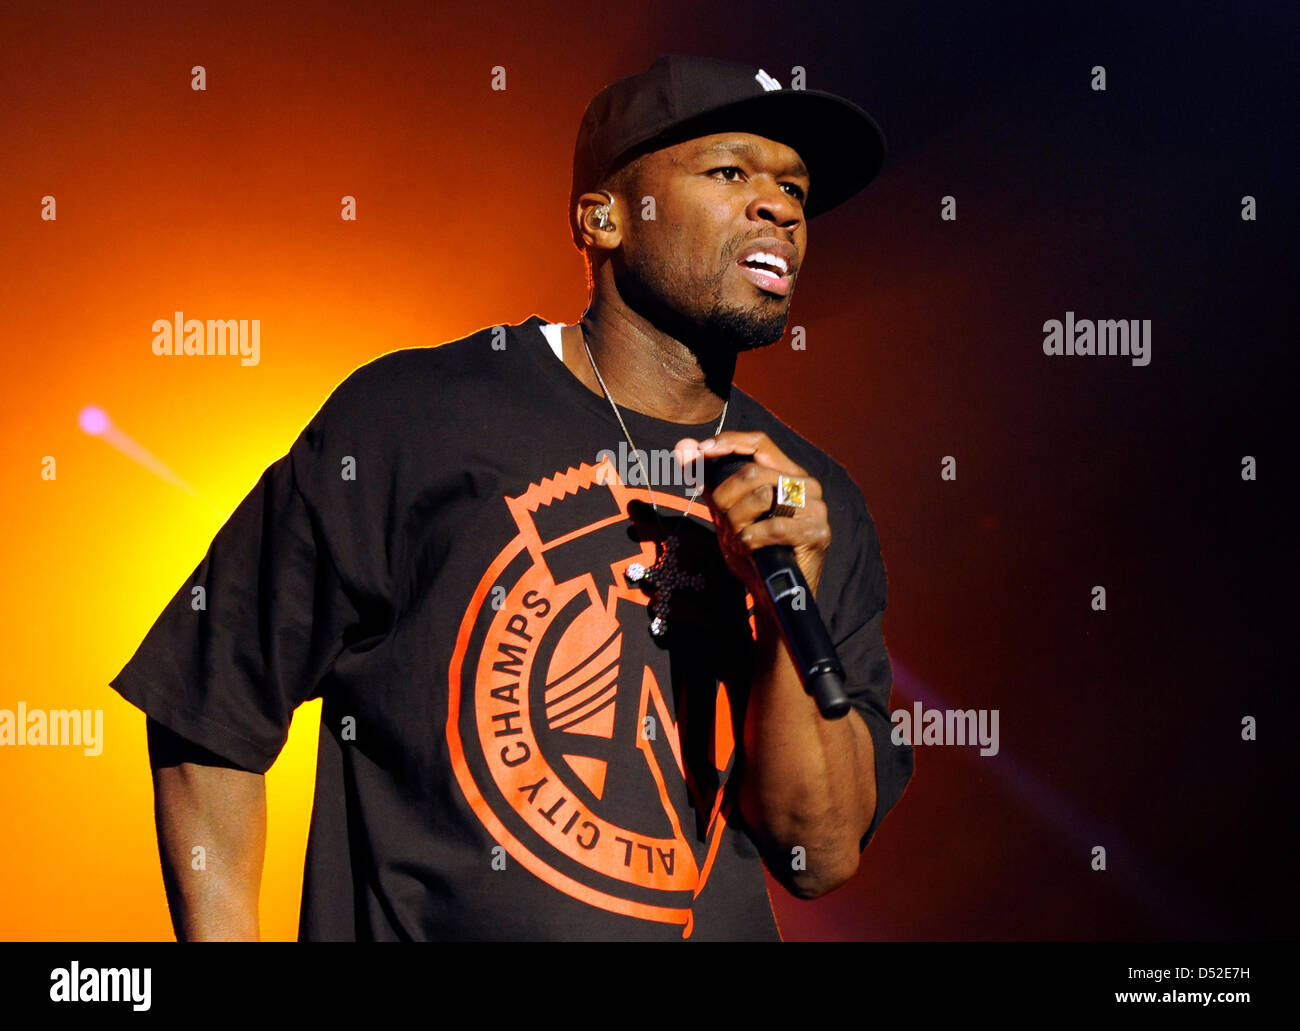 US rapper 50 Cent performs during a concert at C-Halle in Berlin, Germany, 23 February 2010. Curtis Jackson alias 50 Cent will give several concerts in Germany during his 'Before I Self-Destruct Tour'. Photo: Britta Pedersen Stock Photo